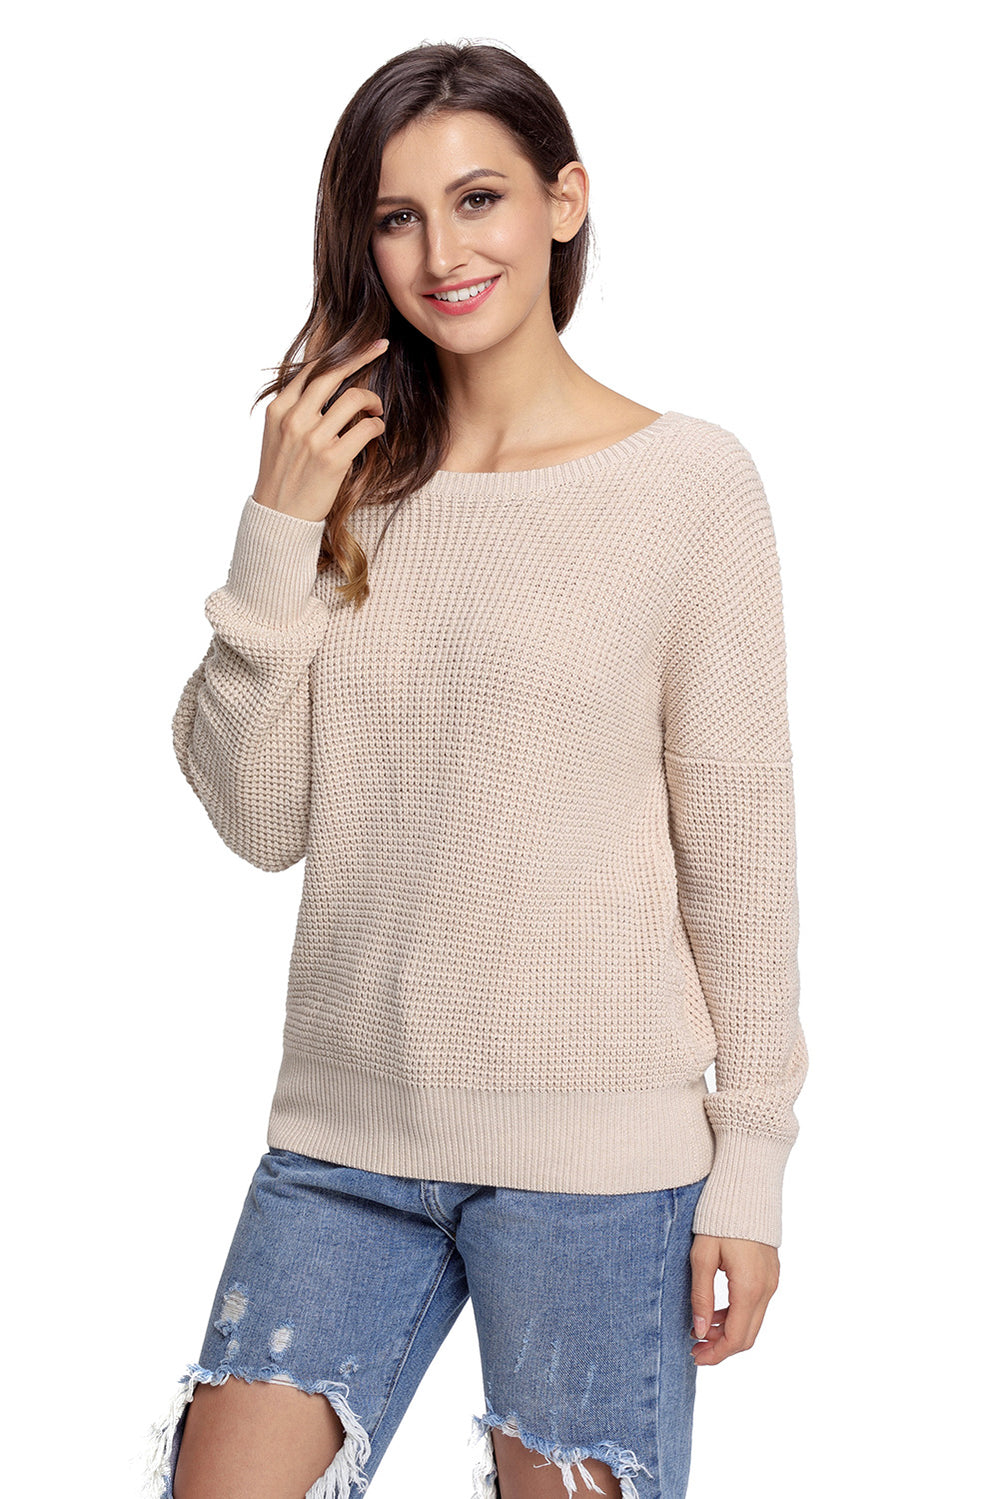 Aprioct Cross Back Hollow-out Long Sleeve Sweater